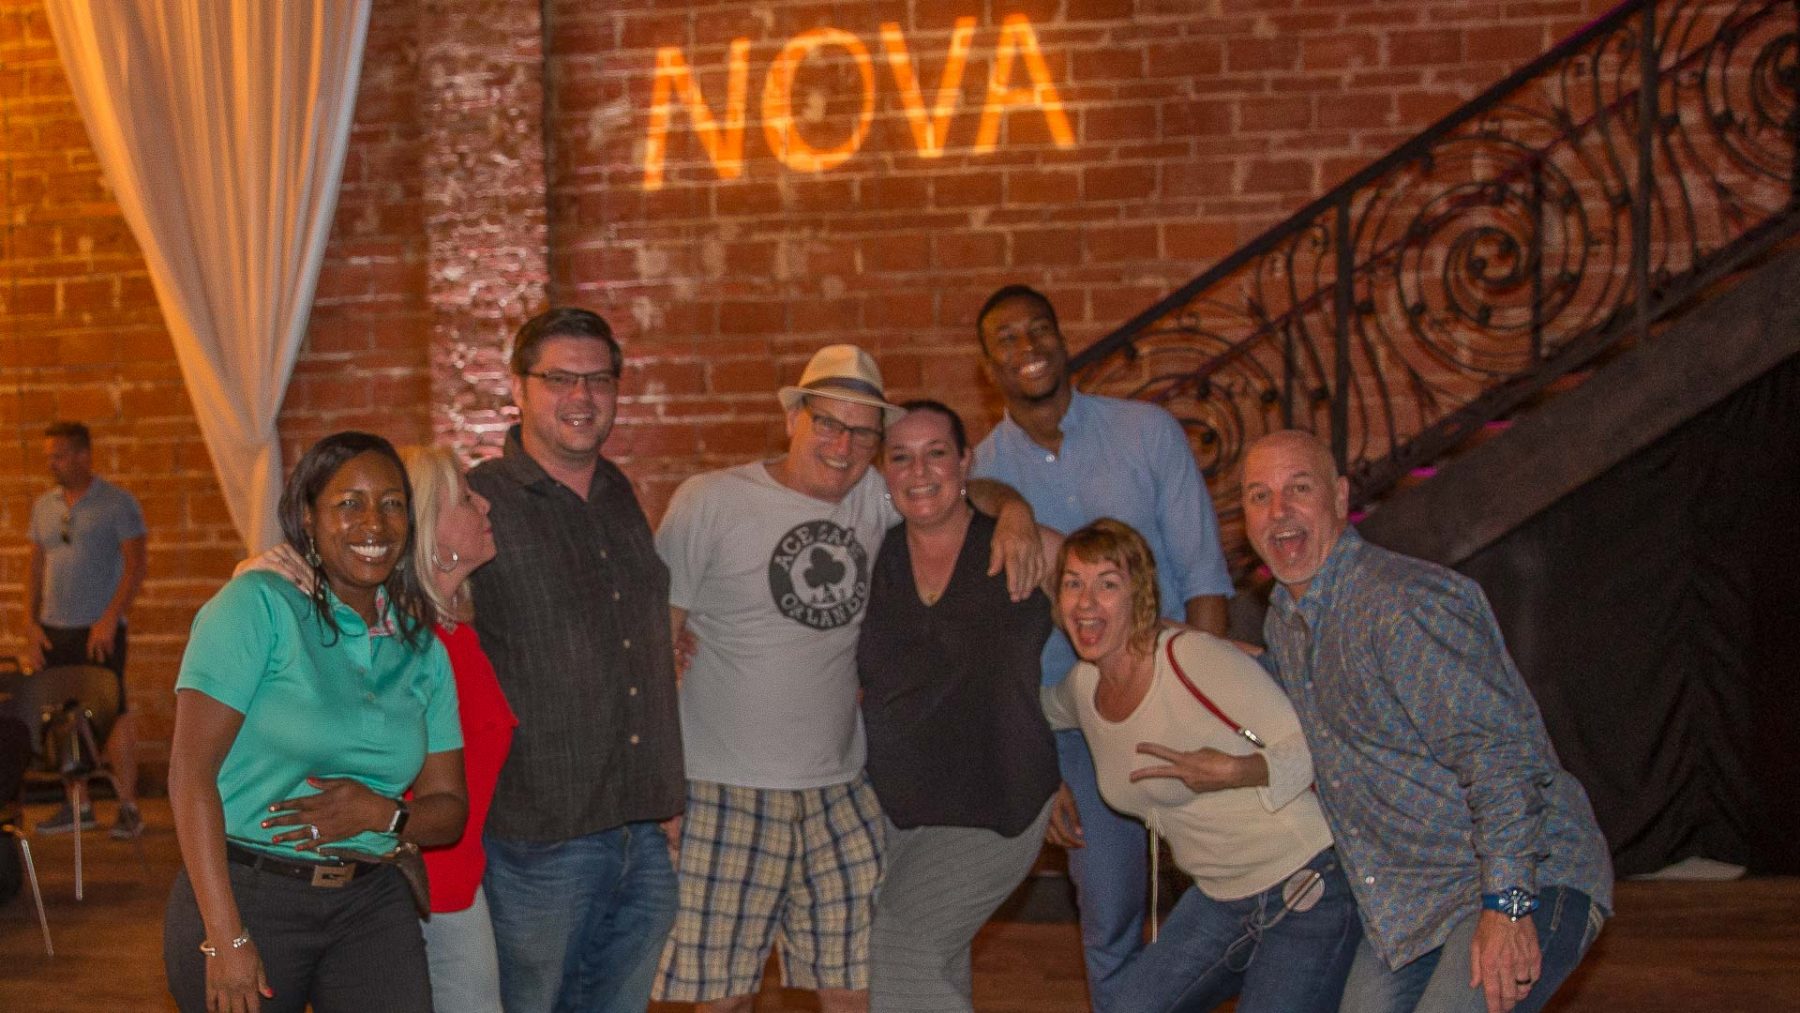 xpress yourself at our weekly entrepreneur social club at historic downtown St. Pete Florida venue NOVA 535